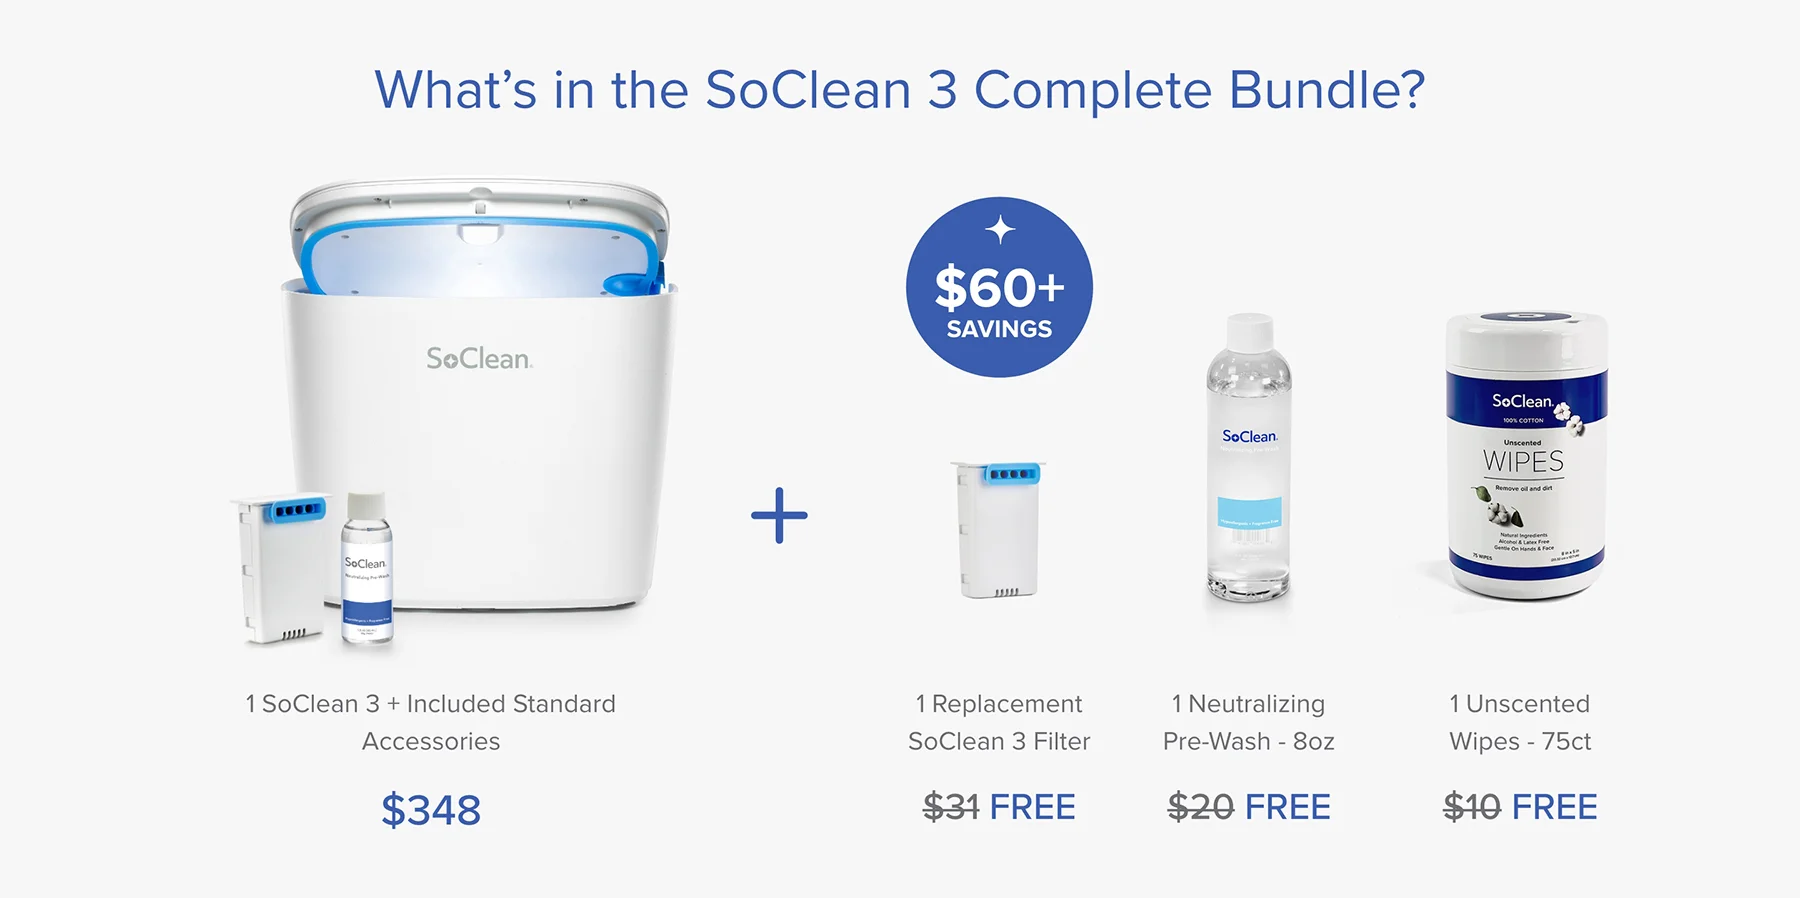 What is in the SoClean 3 Complete Bundle